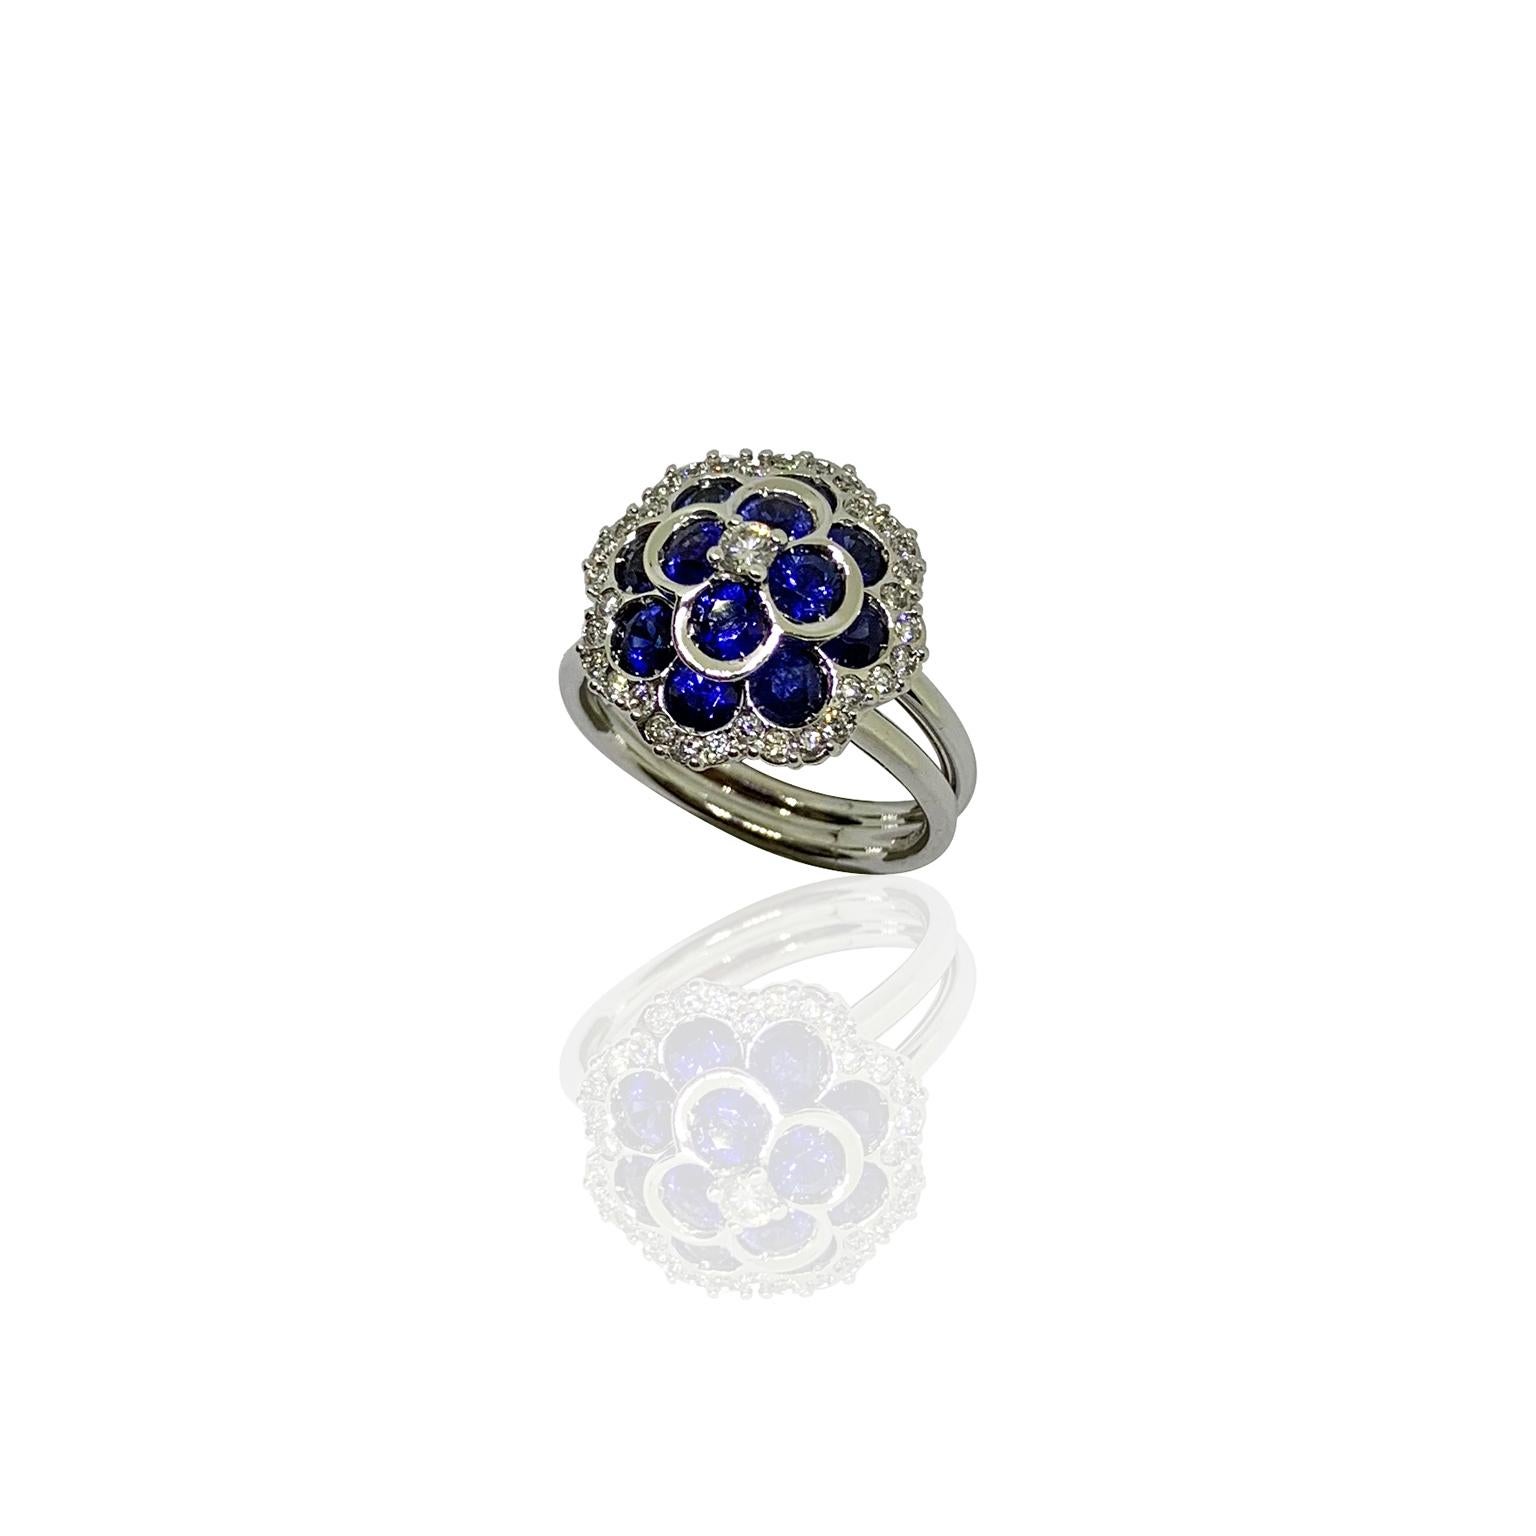 White 18 kt gold ring diamonds and natural blu sapphire designing a flour
Stamp 750
total gold weight. g 10,00
total diamond weight ct 0,50
total sapphire weight 2,23
usa size 7 1/2